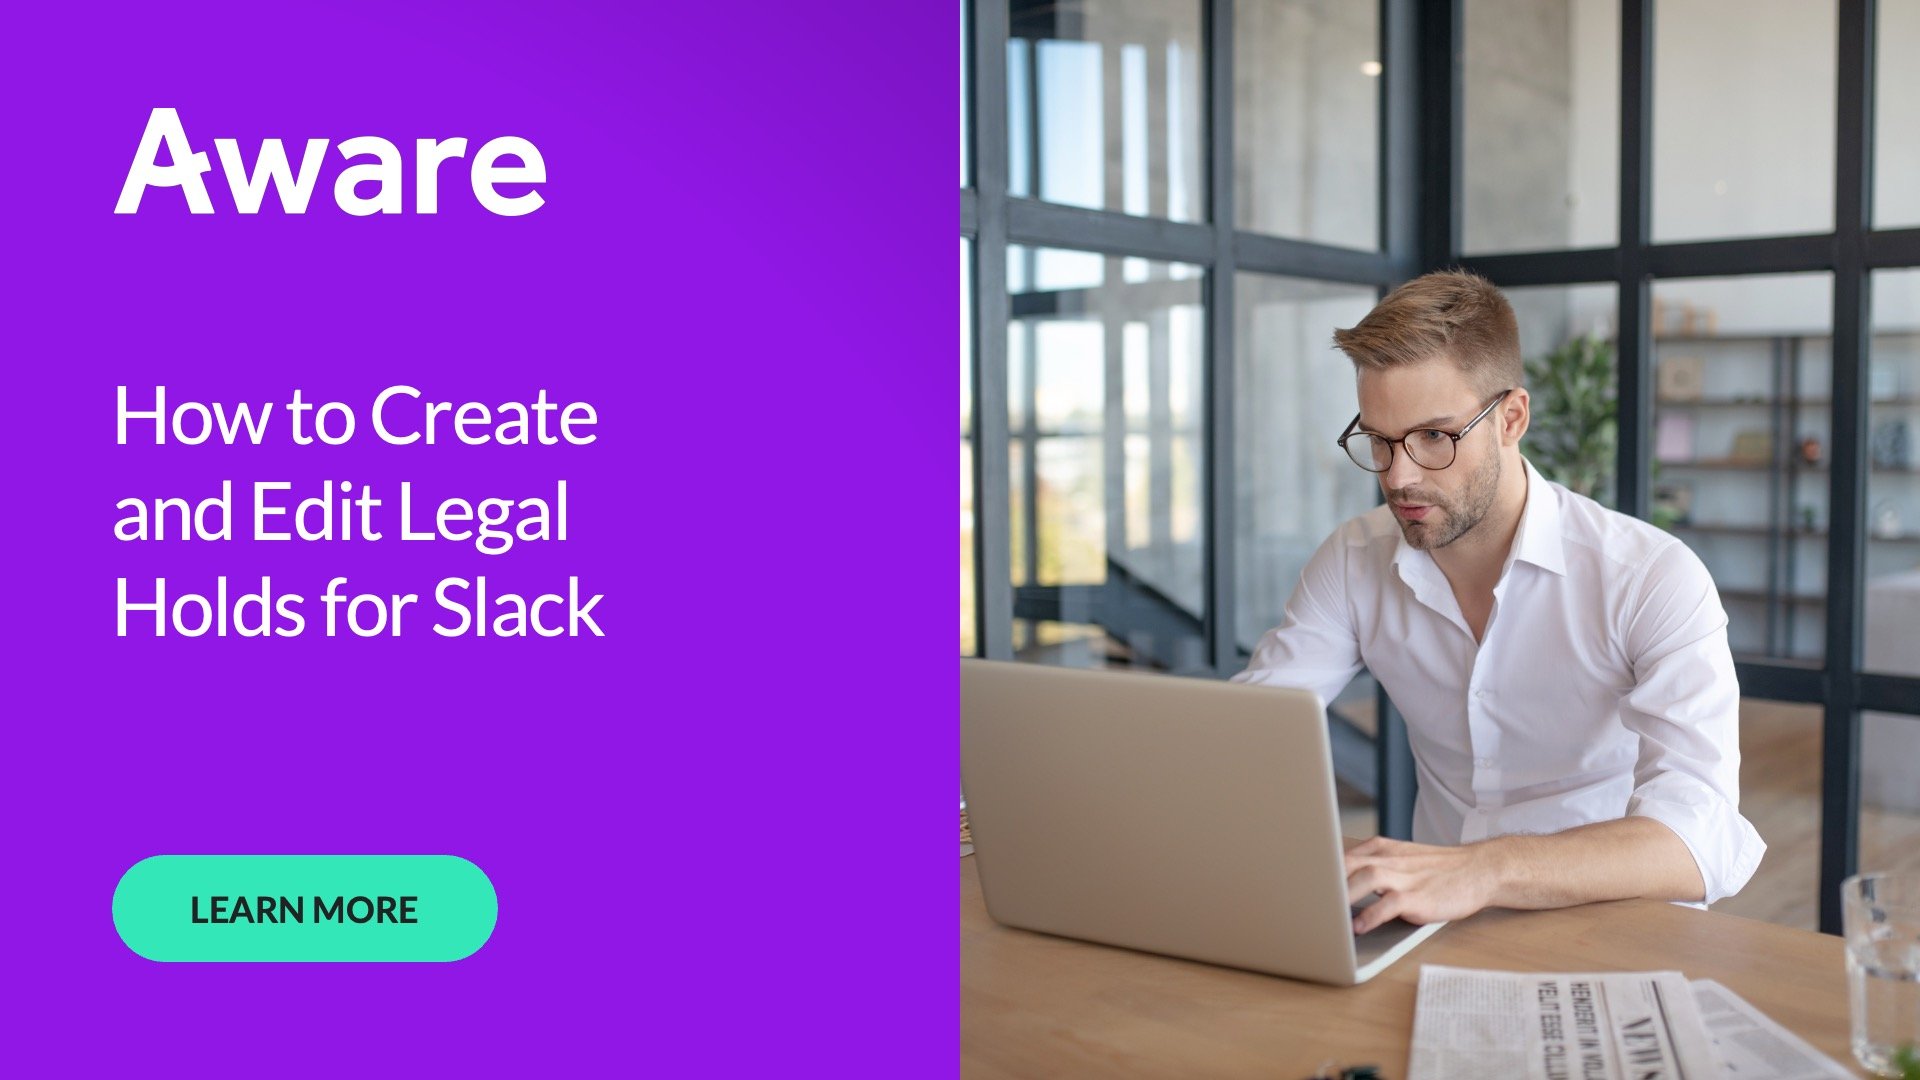 How to Create and Edit Legal Holds for Slack